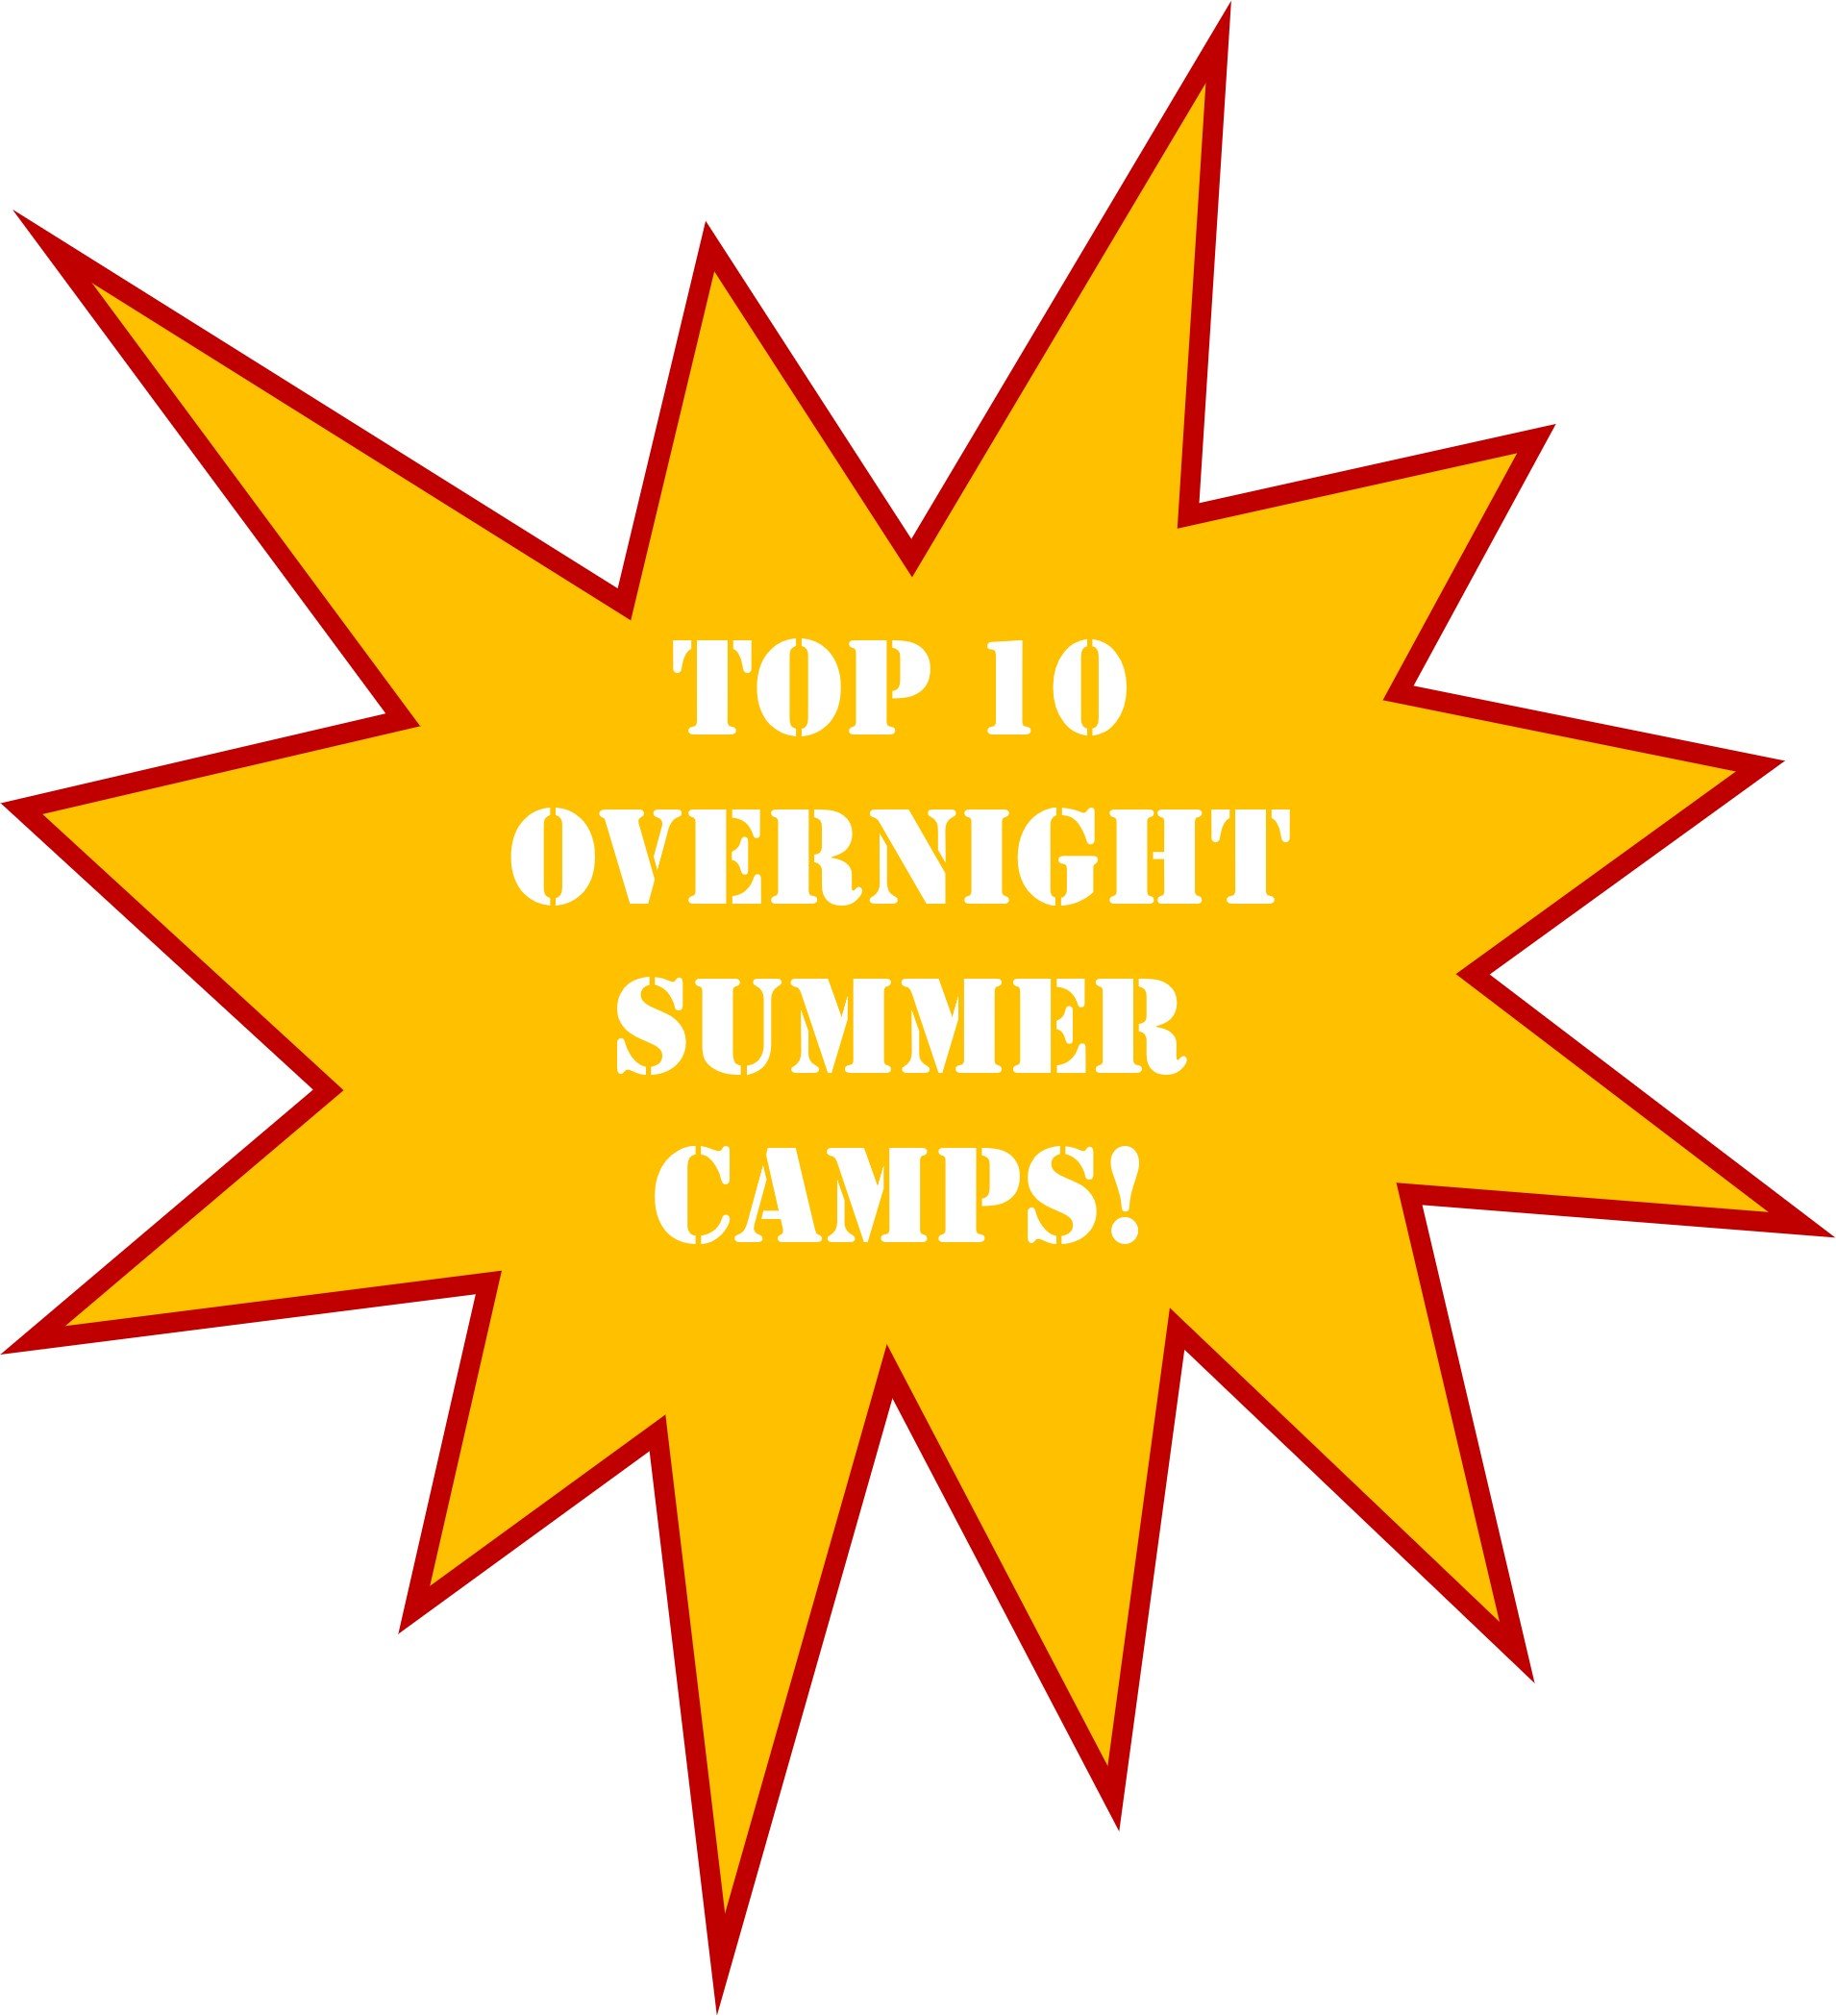 Top 10 Overnight Summer Camps Banner